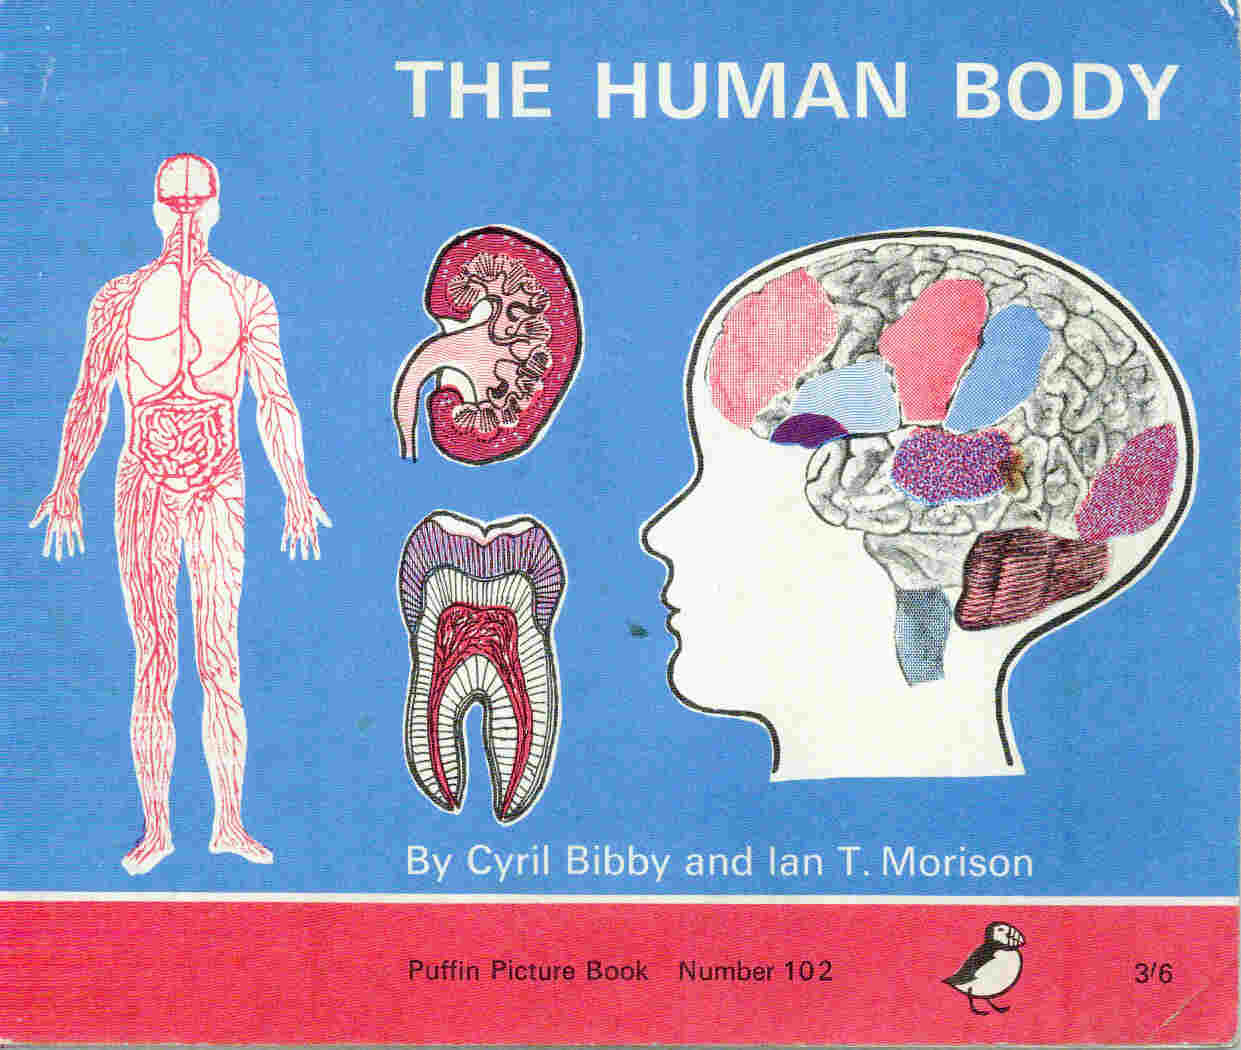 The Human Body. Puffin Picture Book No. 102.